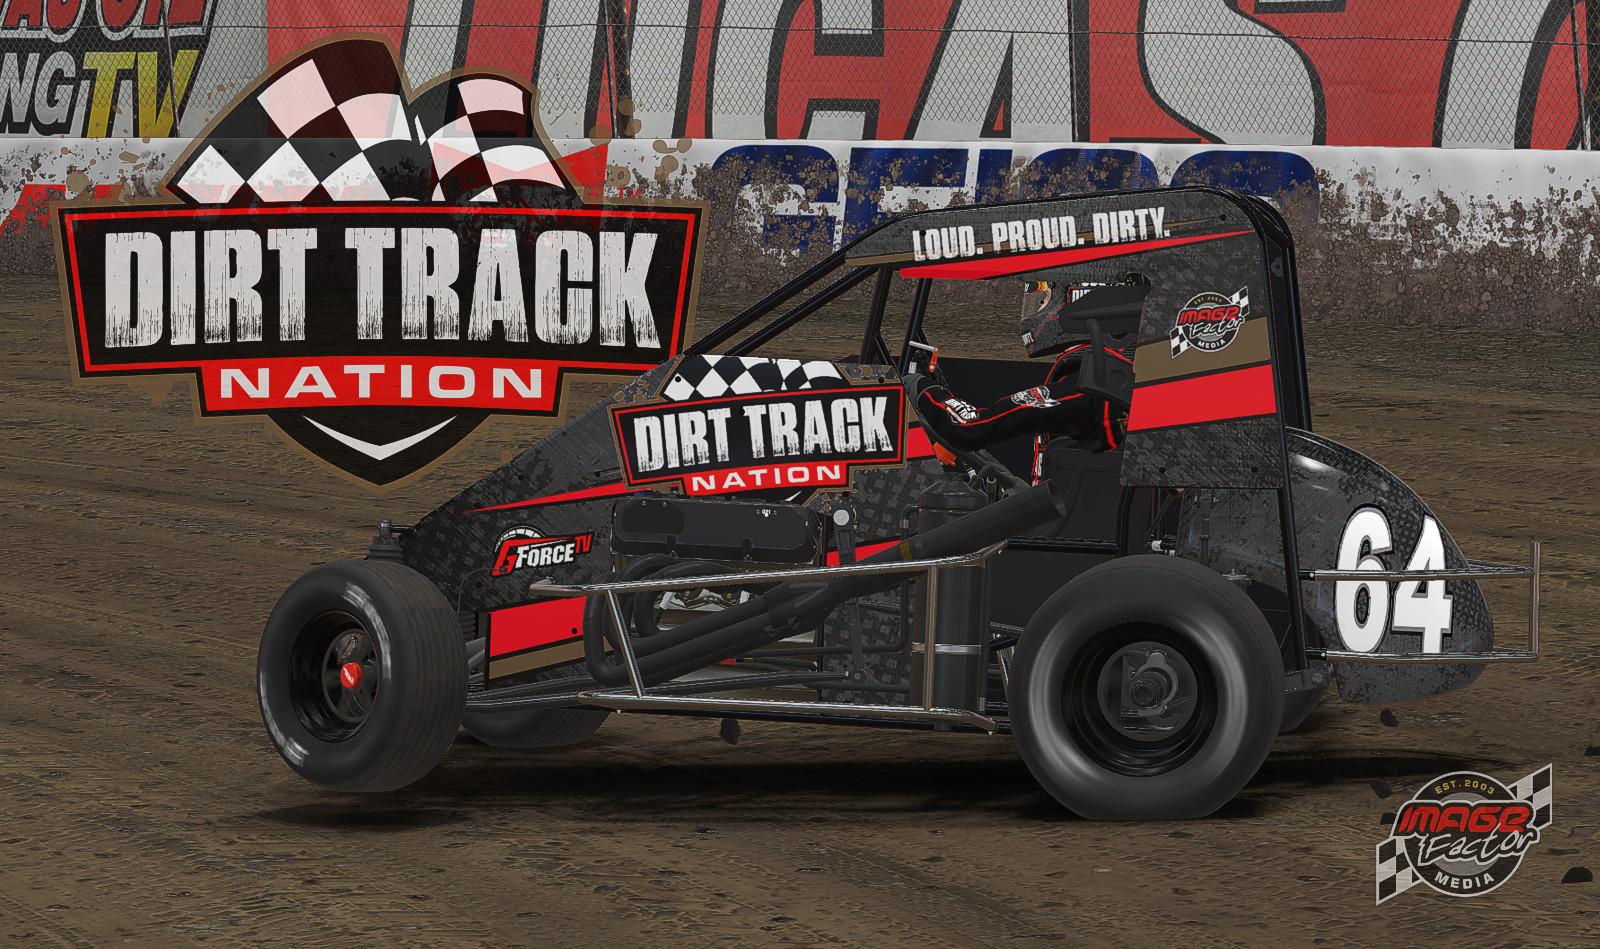 Preview of Dirt Track Nation Midget by Greg Calnan